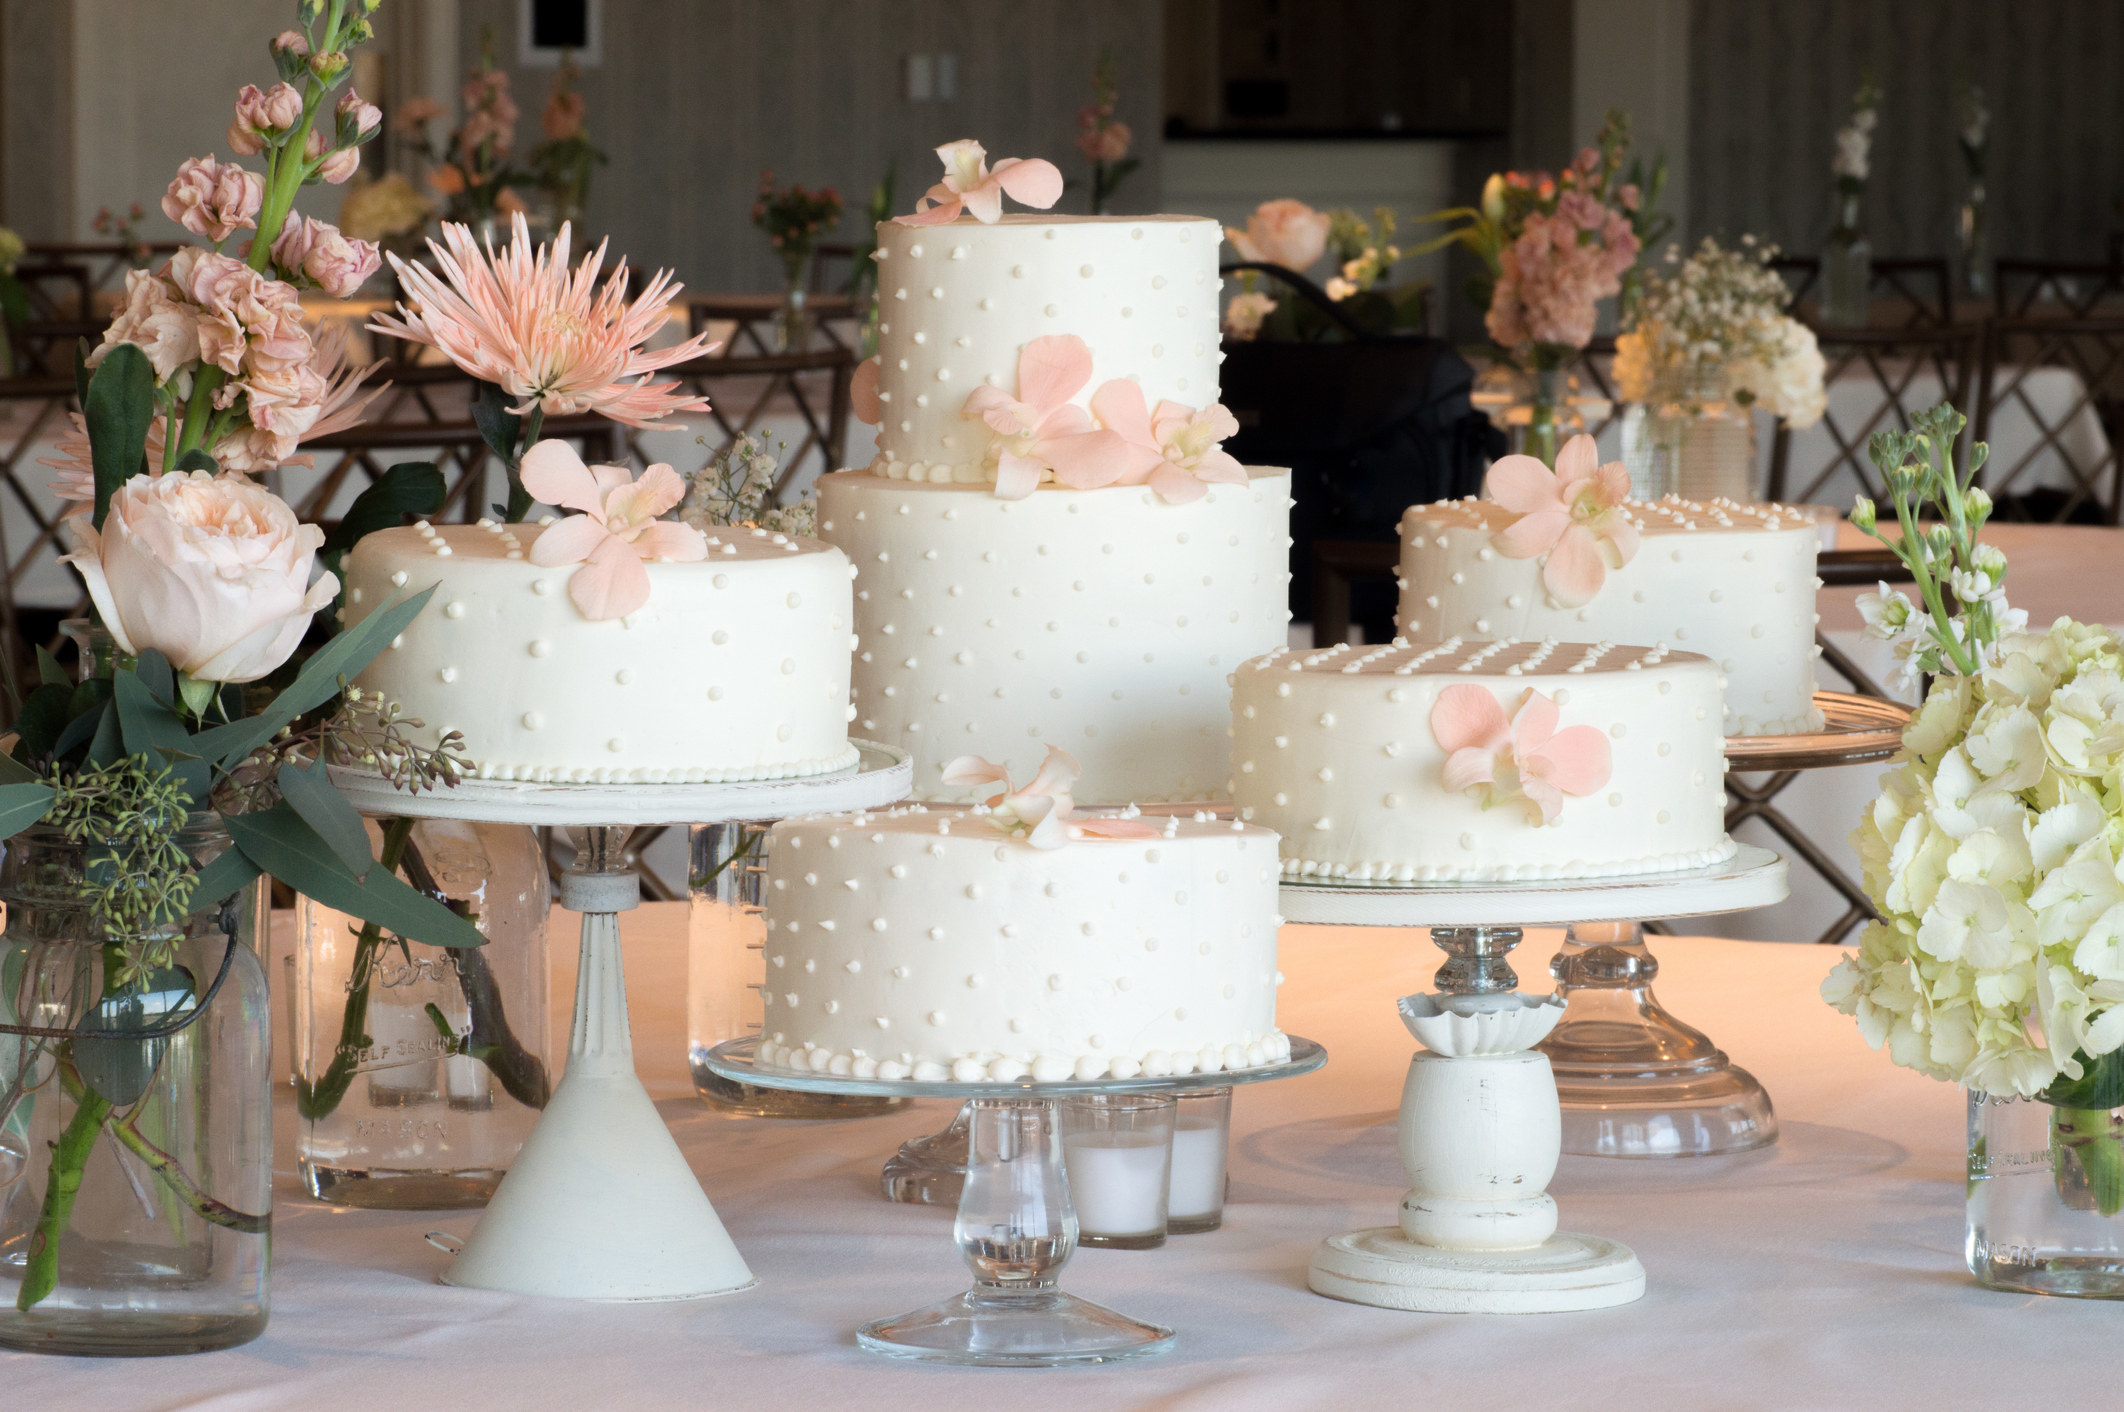 cakes on cake stands surrounded by flowers